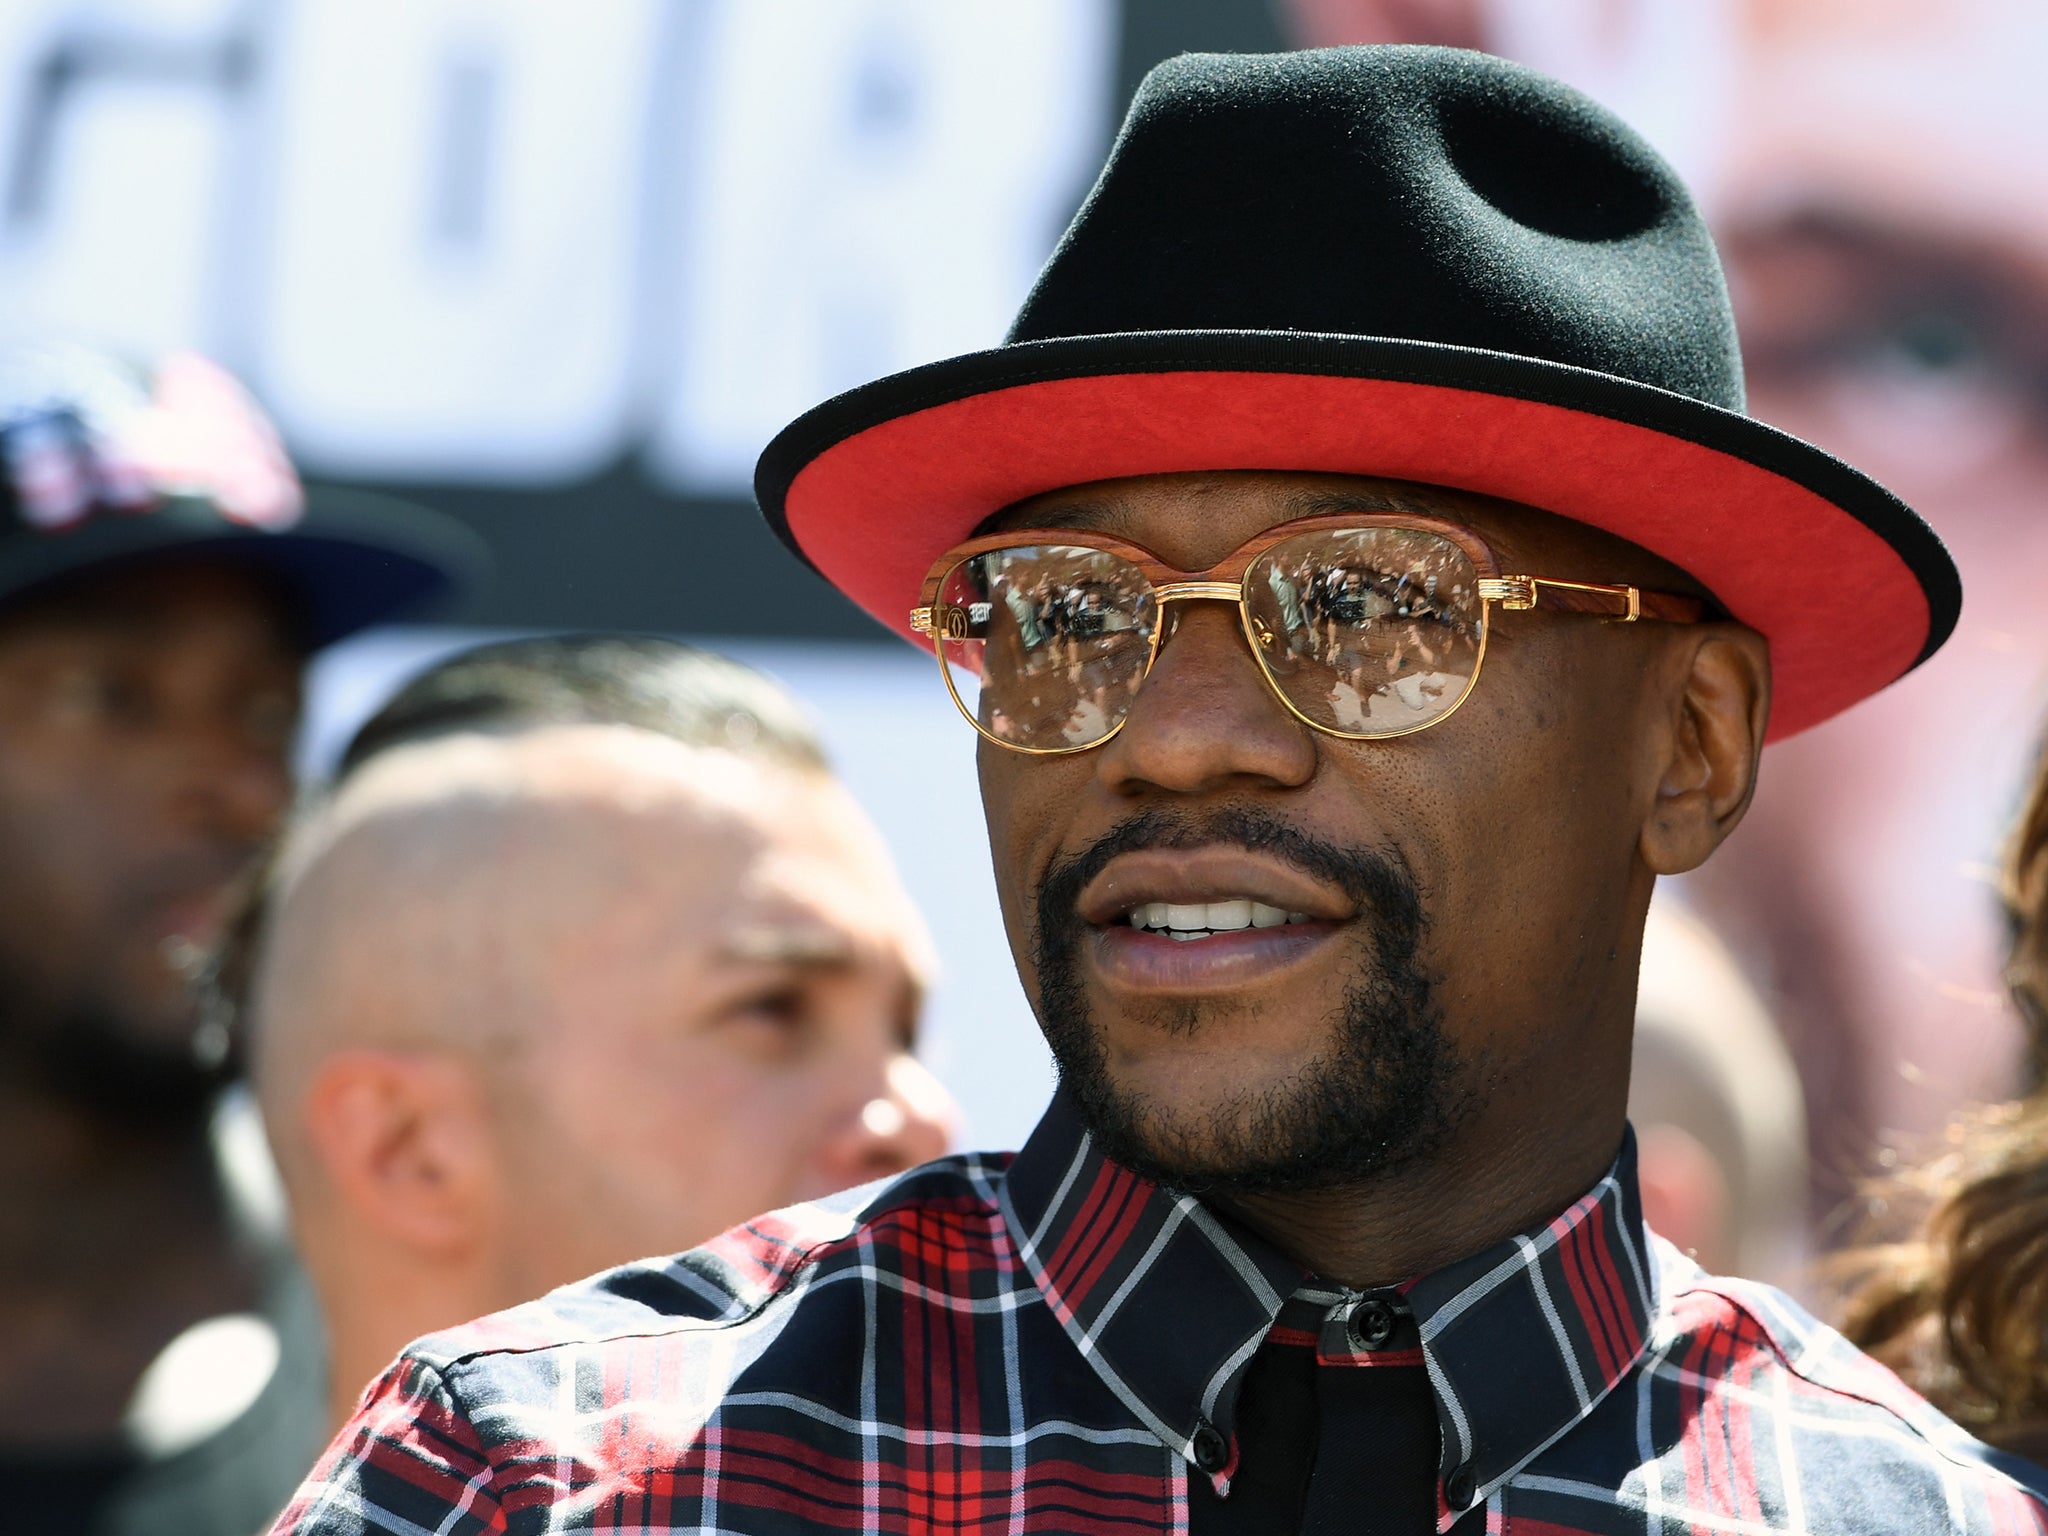 Mayweather is the overwhelming favourite to win